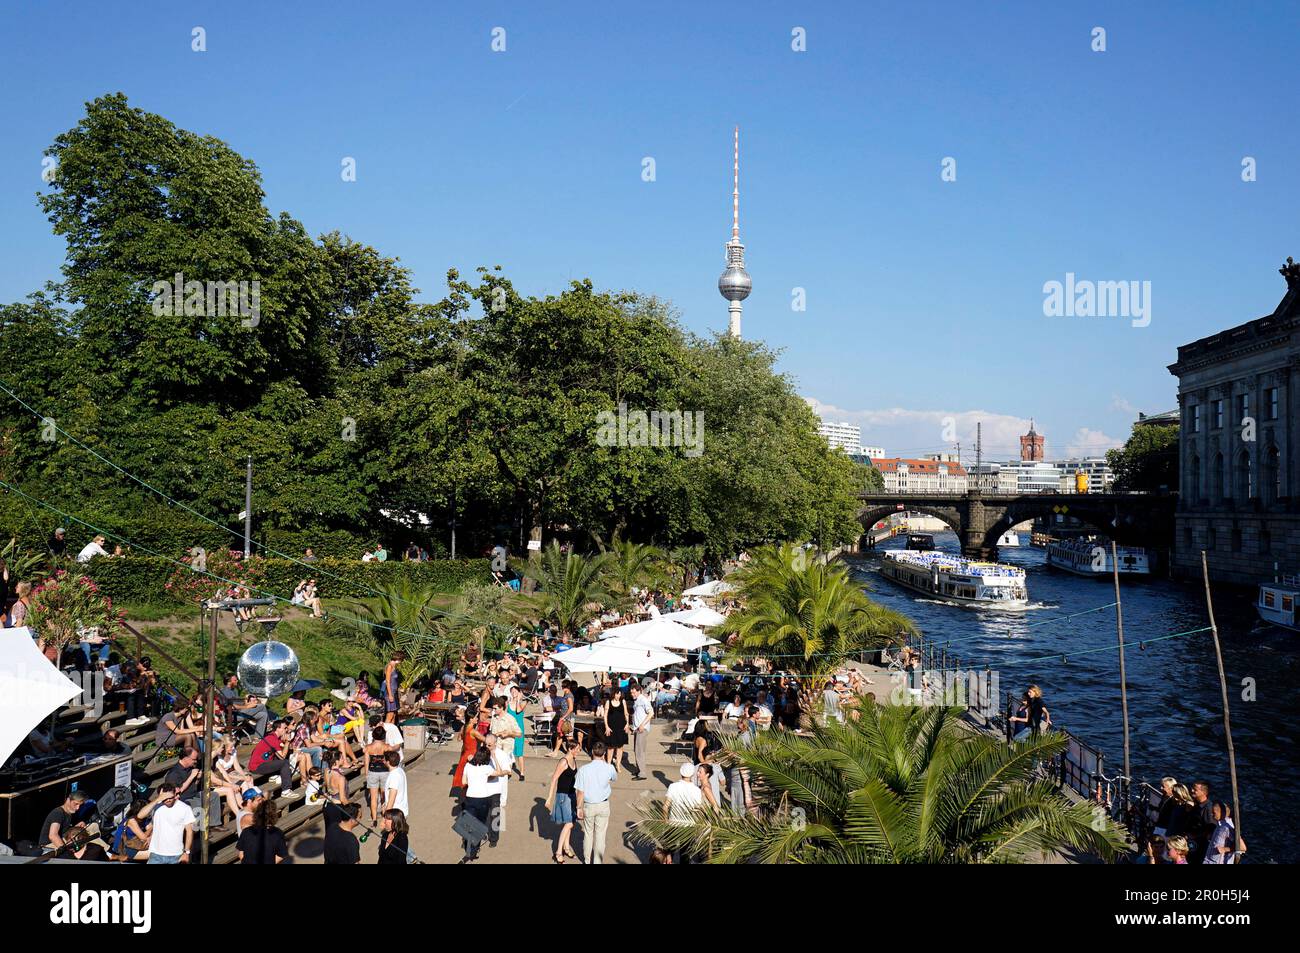 Beach Bar with palm trees next to the Spree River, Mitte, Tango Dance, Alex, Berlin, Germany Stock Photo